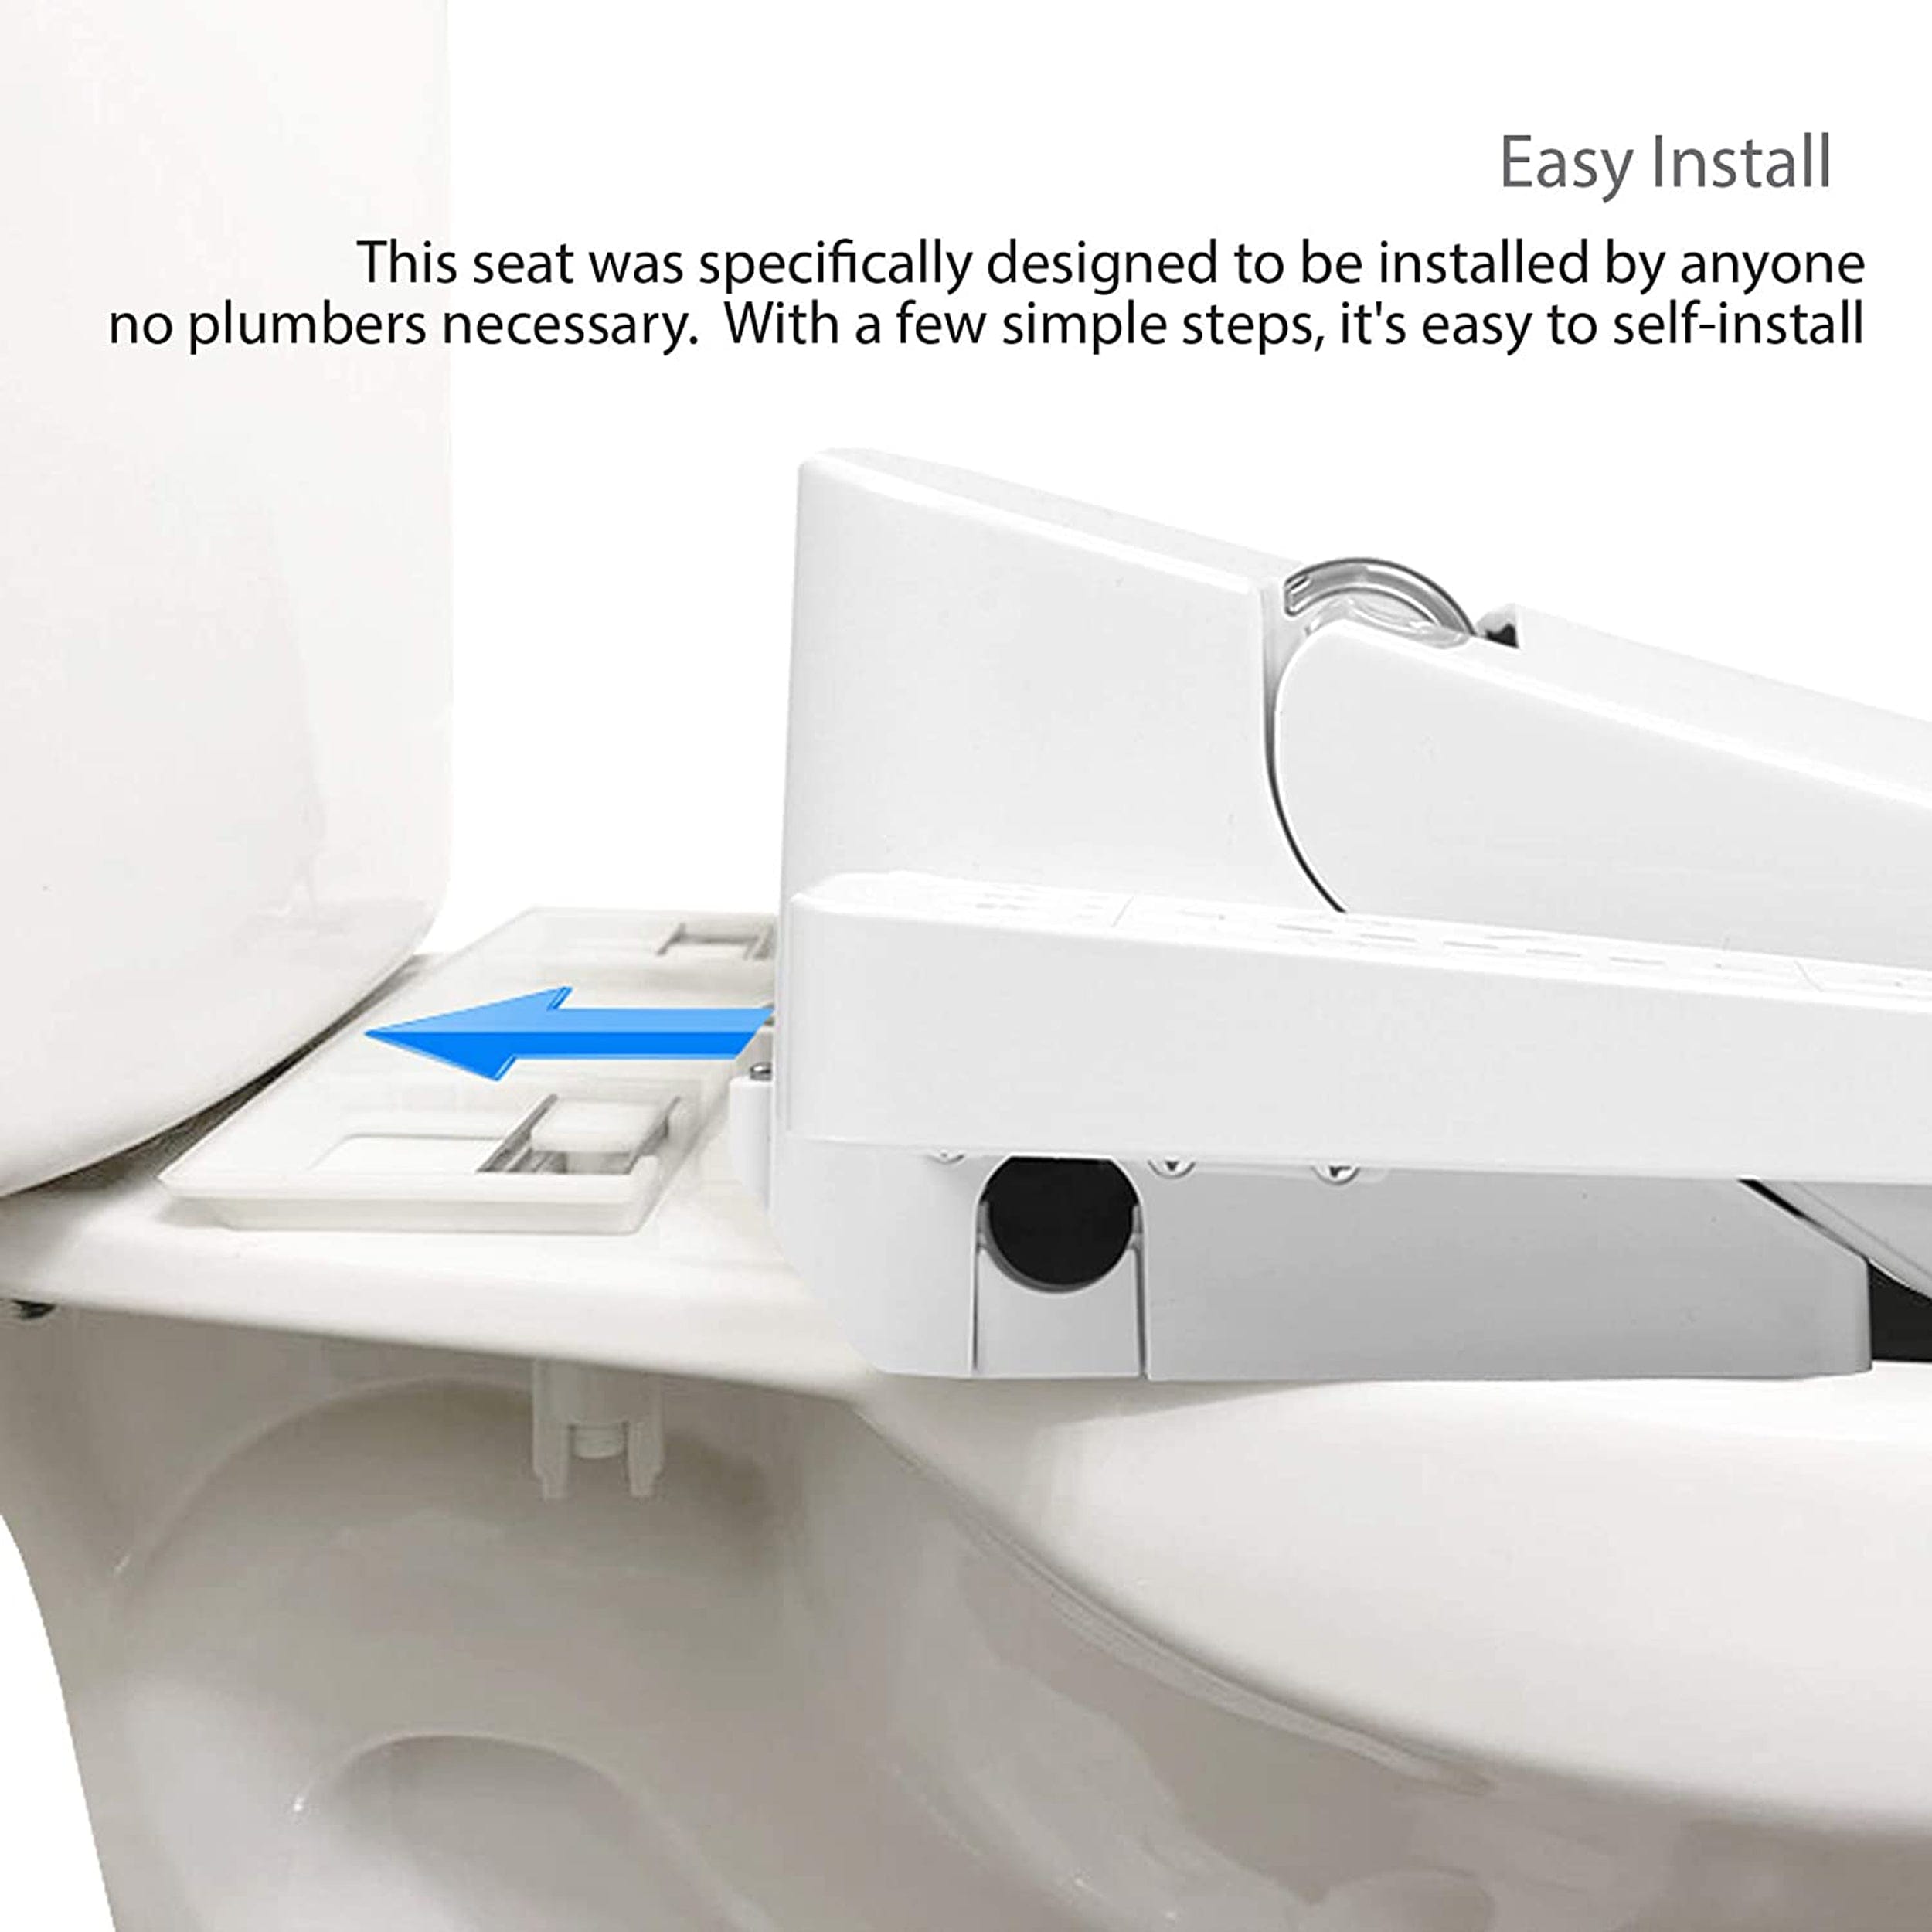 VOVO Stylement VB-3000SE Bidet Toilet Seat In Stock and Free Shipping ...